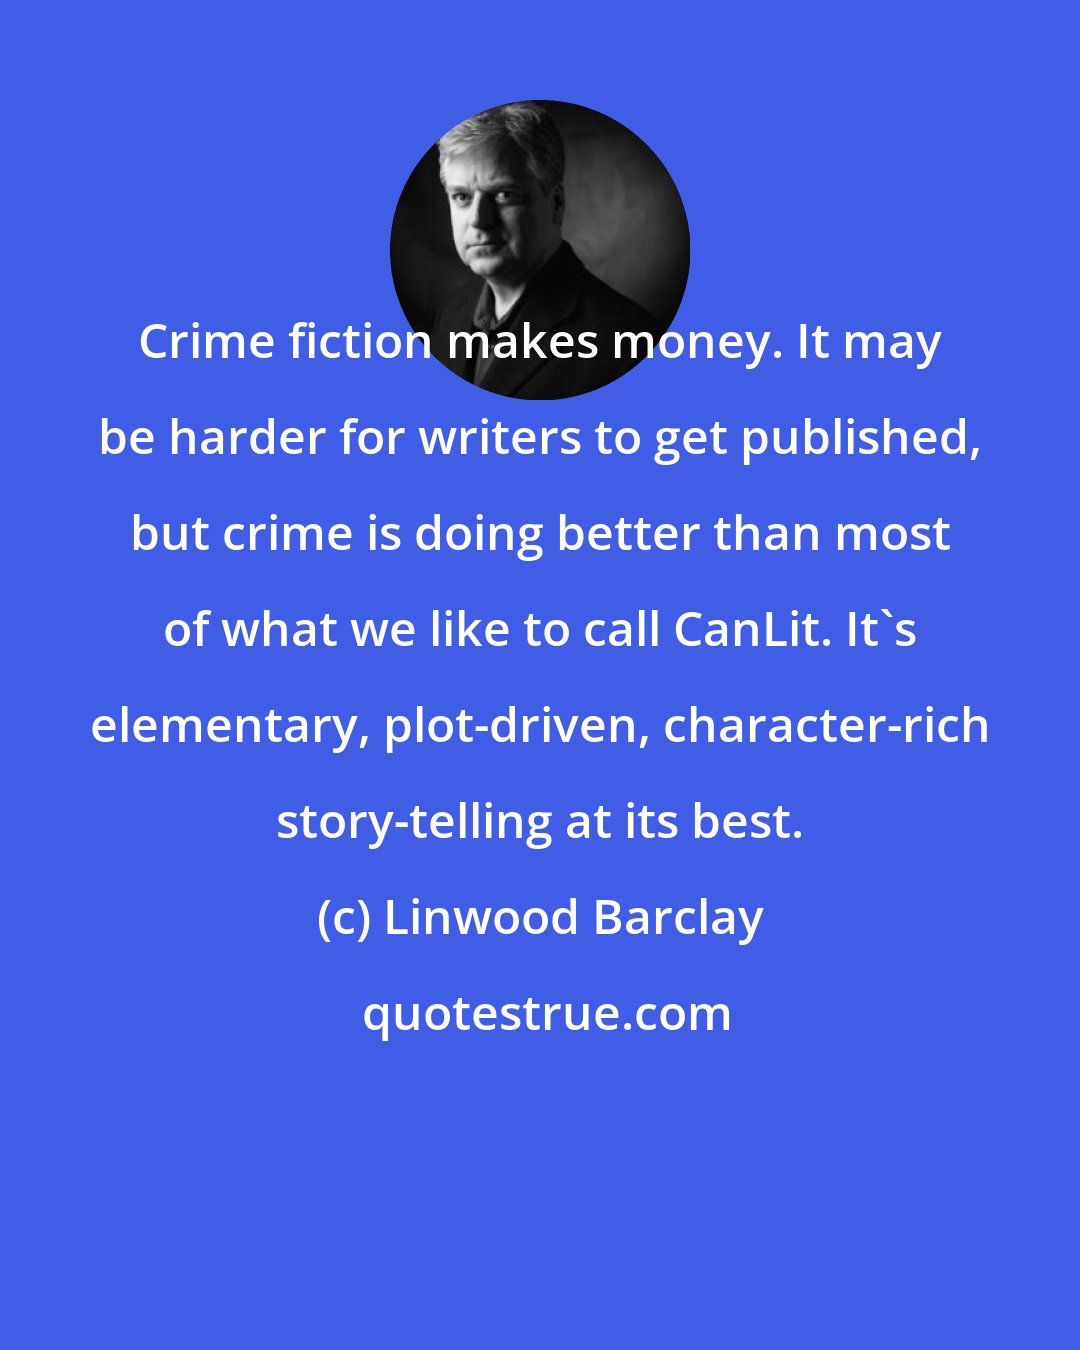 Linwood Barclay: Crime fiction makes money. It may be harder for writers to get published, but crime is doing better than most of what we like to call CanLit. It's elementary, plot-driven, character-rich story-telling at its best.